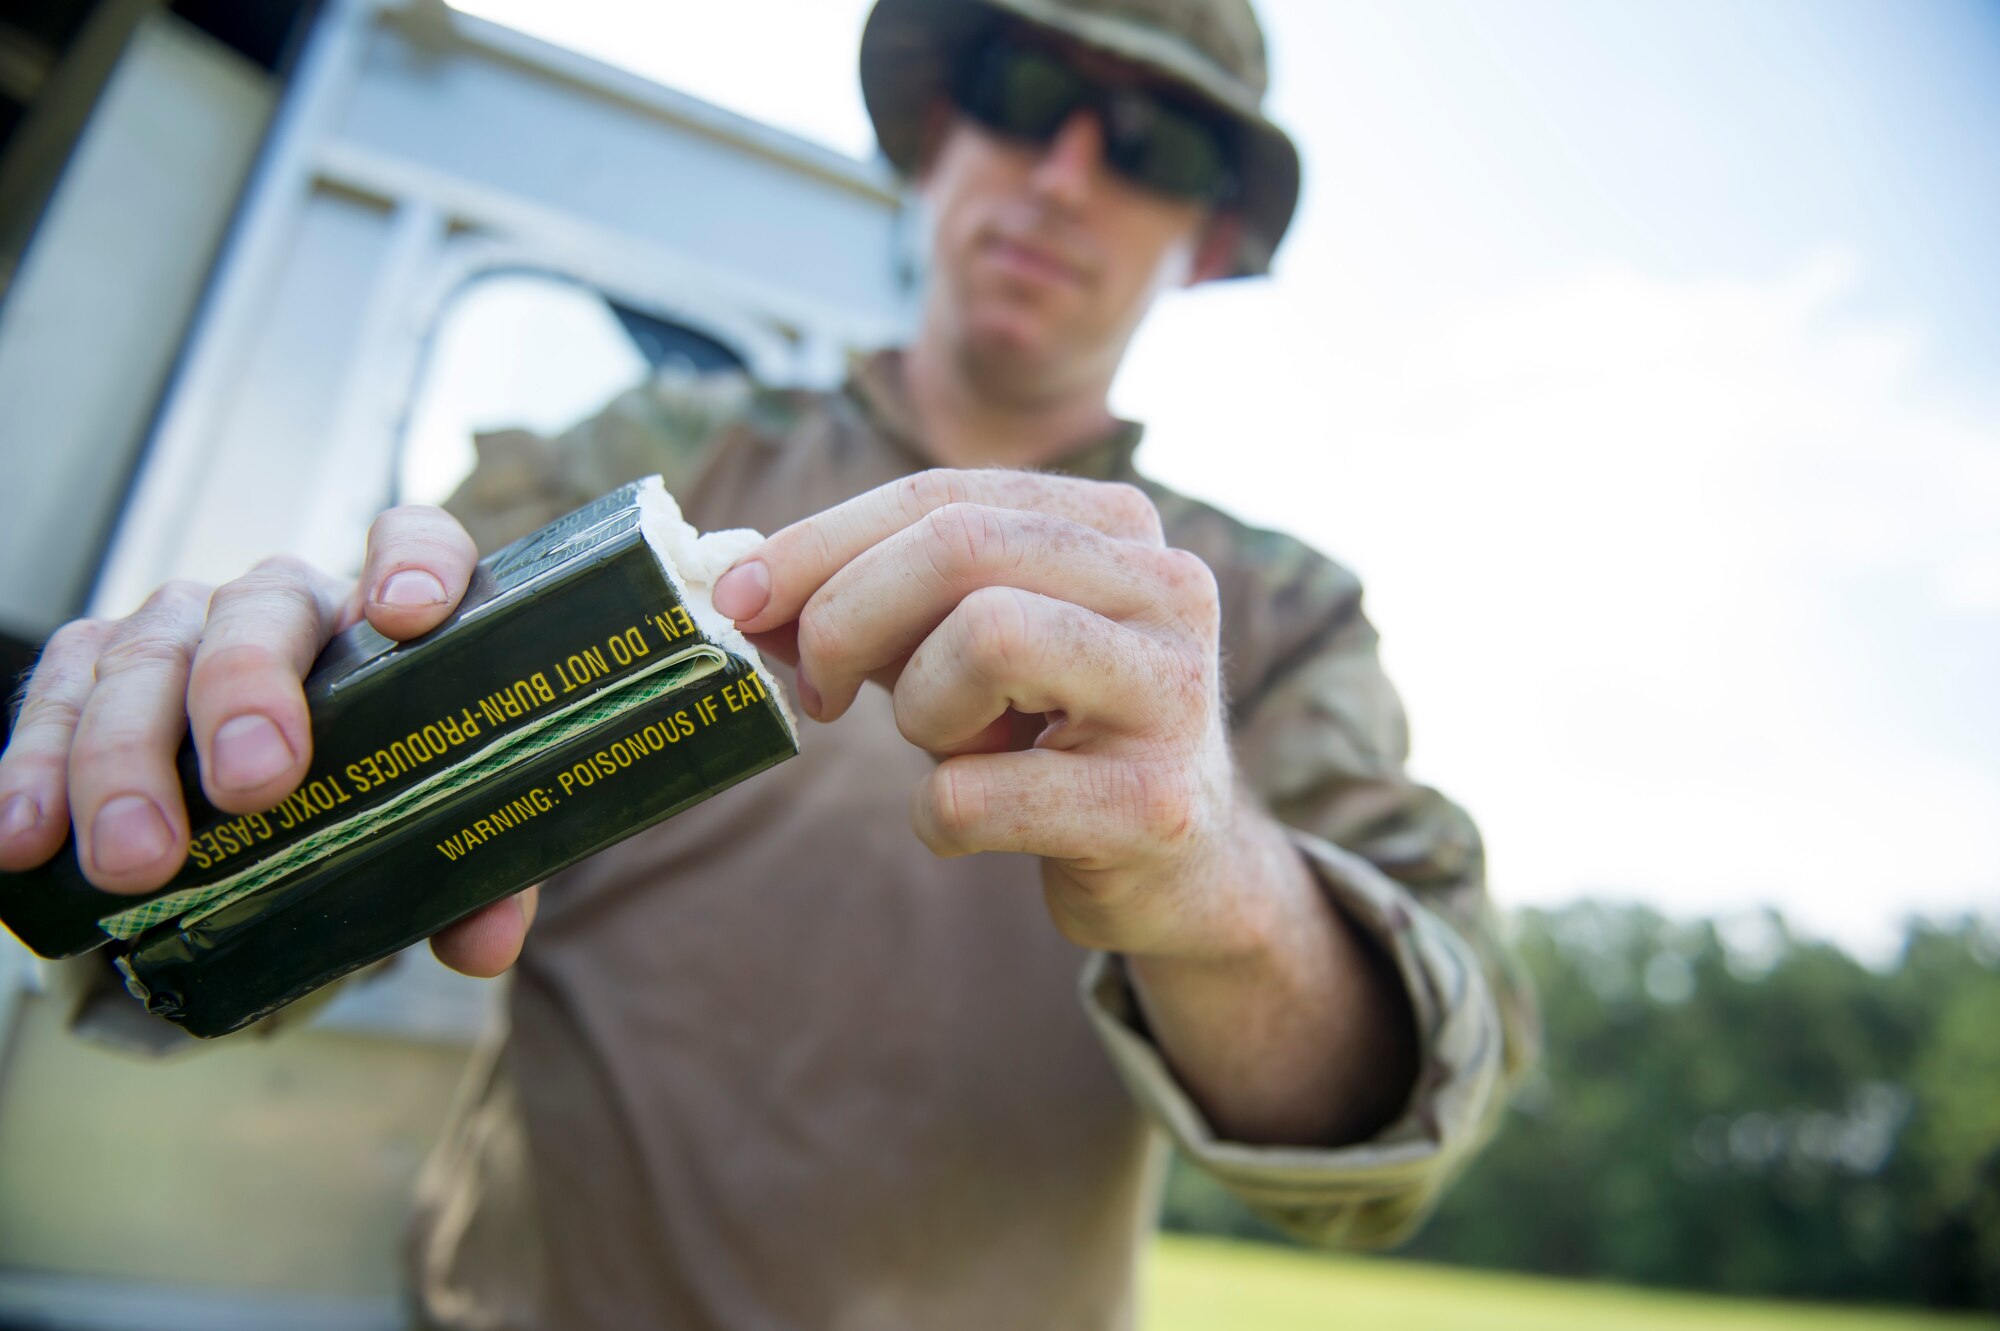 Tech. Sgt. Brenden MCavey, 315th Civil Engineering flight Explosive Ordnance Disposal technician, shows the inside of a stick of C-4 explosive, Aug. 3, 2016 at Joint Base Charleston – Weapons Station, S.C. The joint post-blast analysis training exercise included 22 participants from the Kentucky Air National Guard, South Carolina Air National Guard, Army South Carolina Guard, Mac Dill Air Force Base, Fla. Seymour Johnson Air Force Base, N.C., 628th Civil Engineering Squadron and 315th CEF. The trainees honed their skills of collecting evidence after an IED attack. (U.S. Air Force photo/Staff Sgt. Jared Trimarchi) 